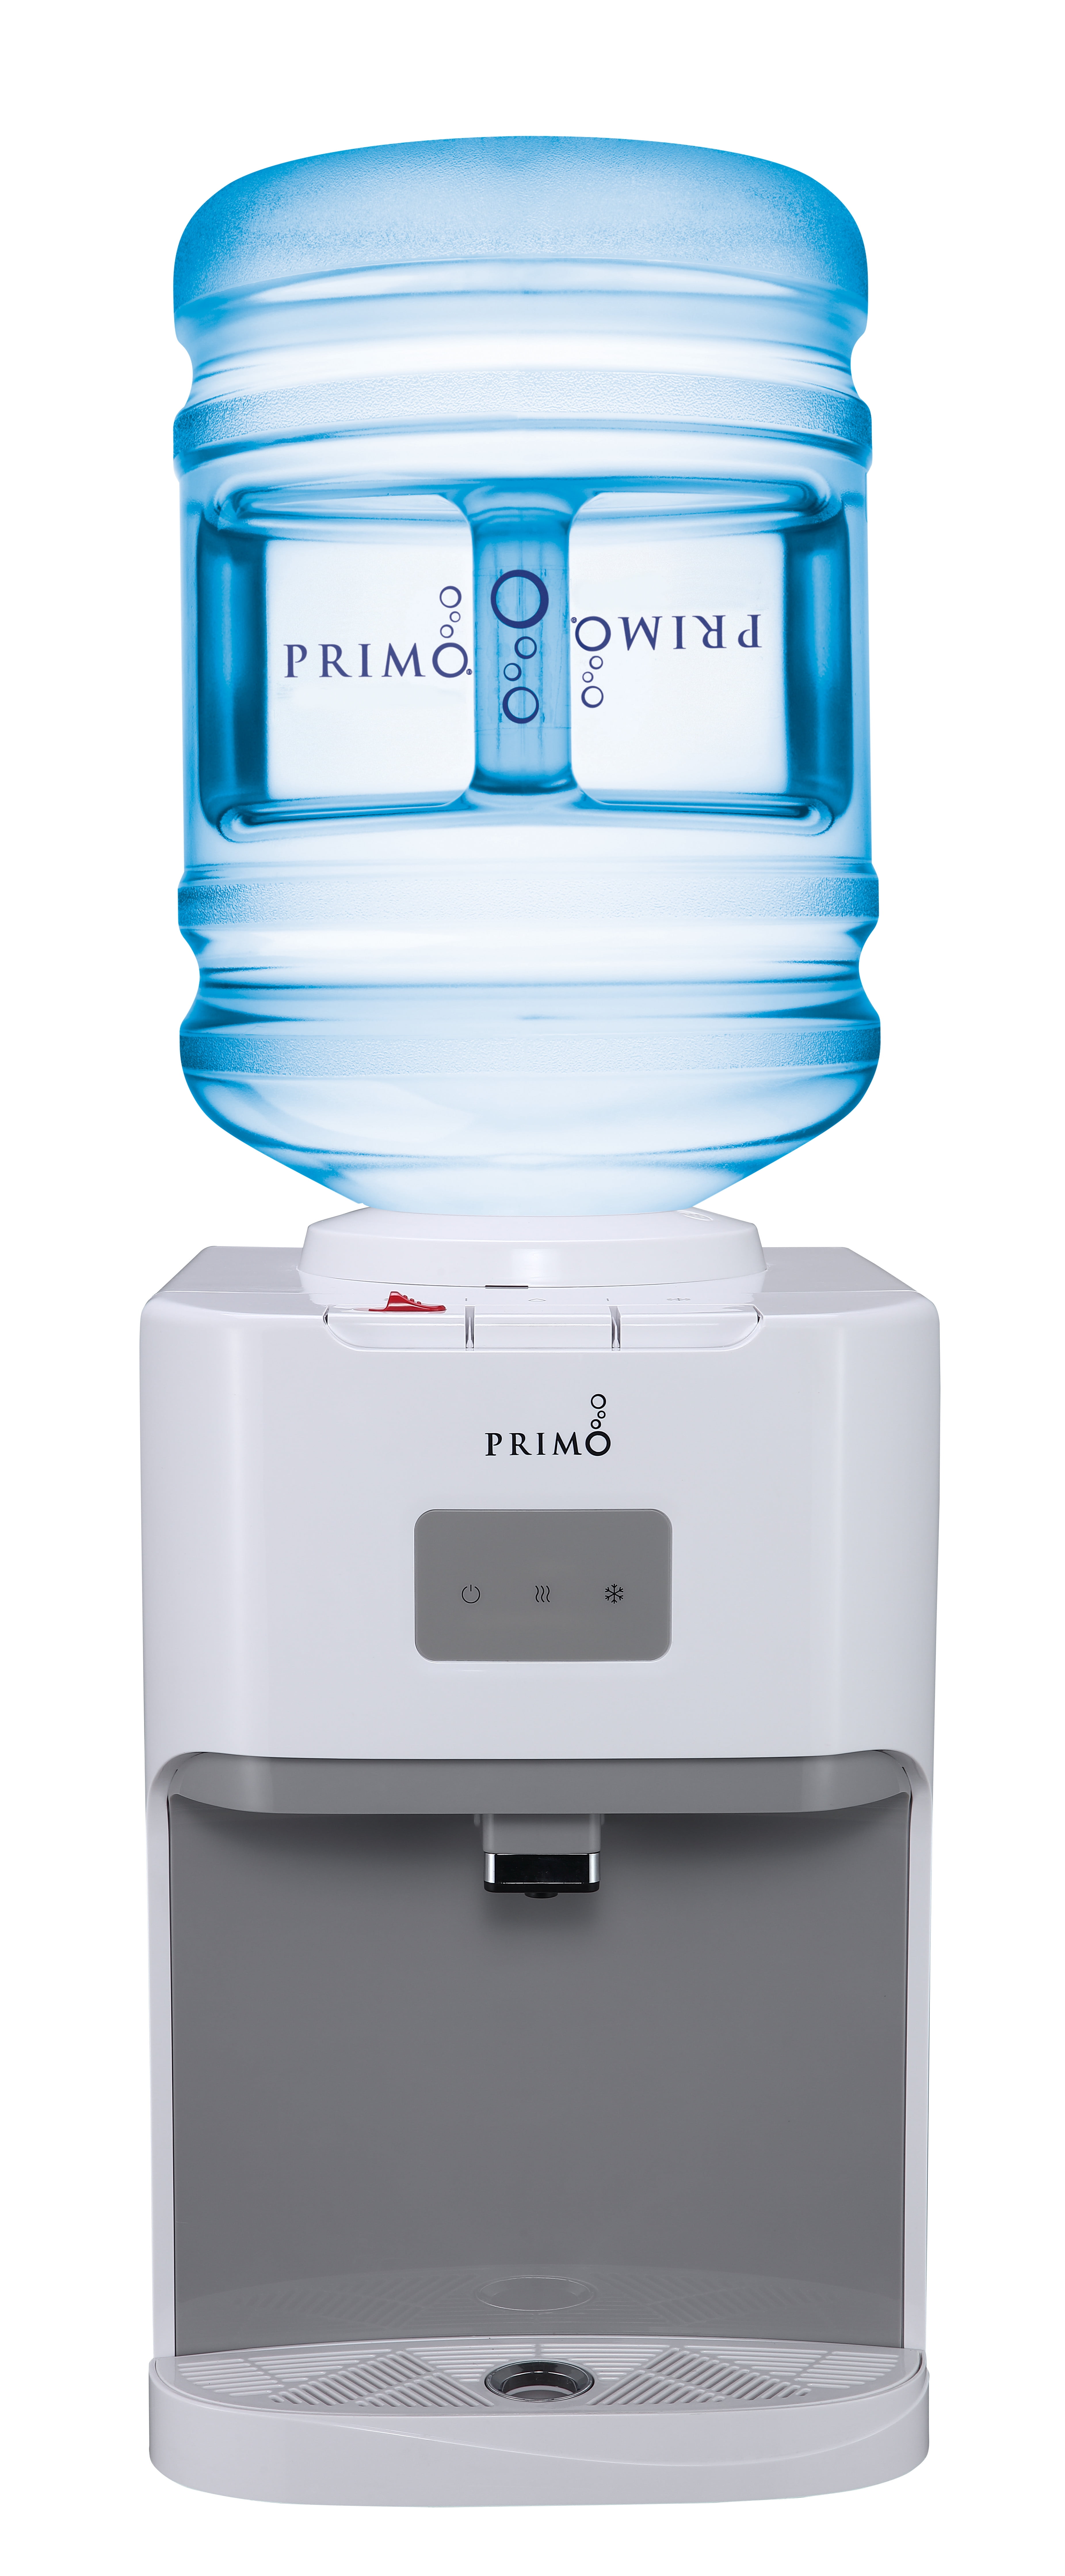 My Review of the Primo Water Dispenser - Dengarden